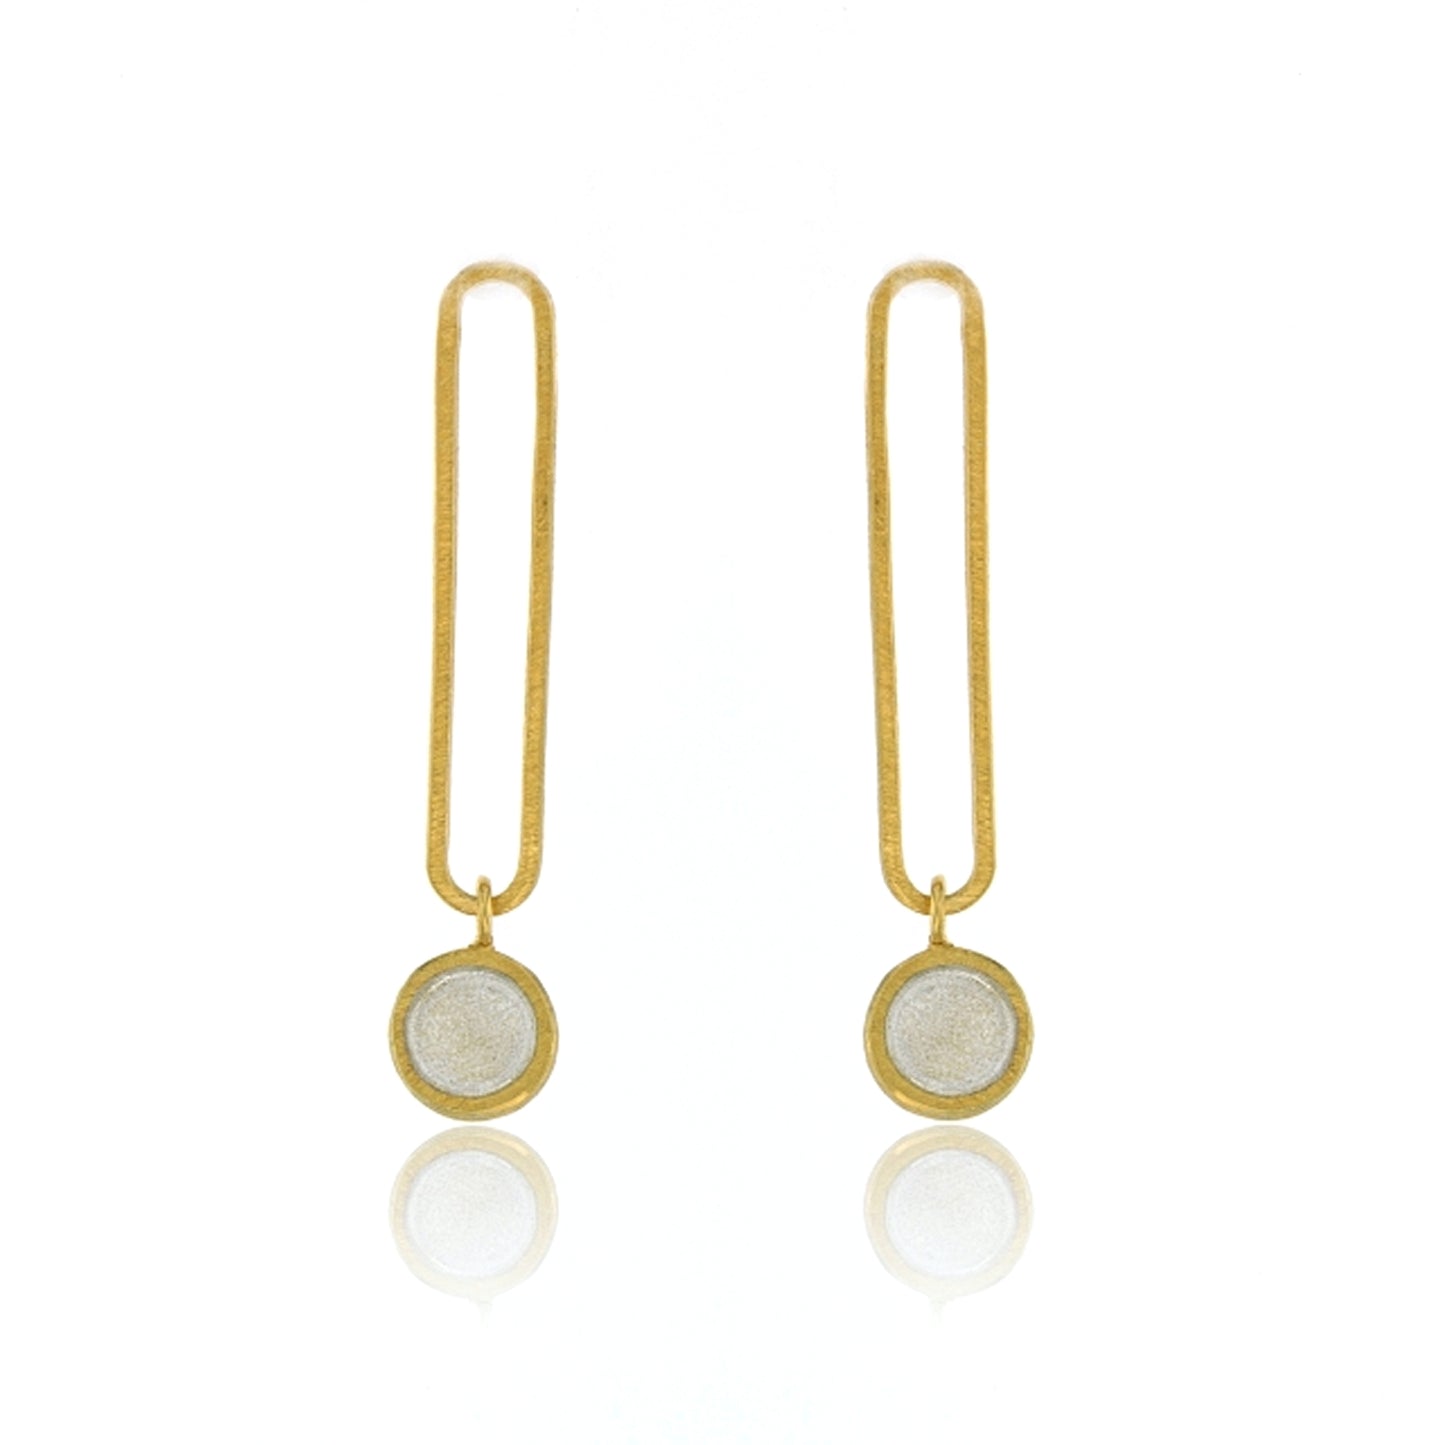 Mysterium Collection Vermeil Oval & Dot Earrings